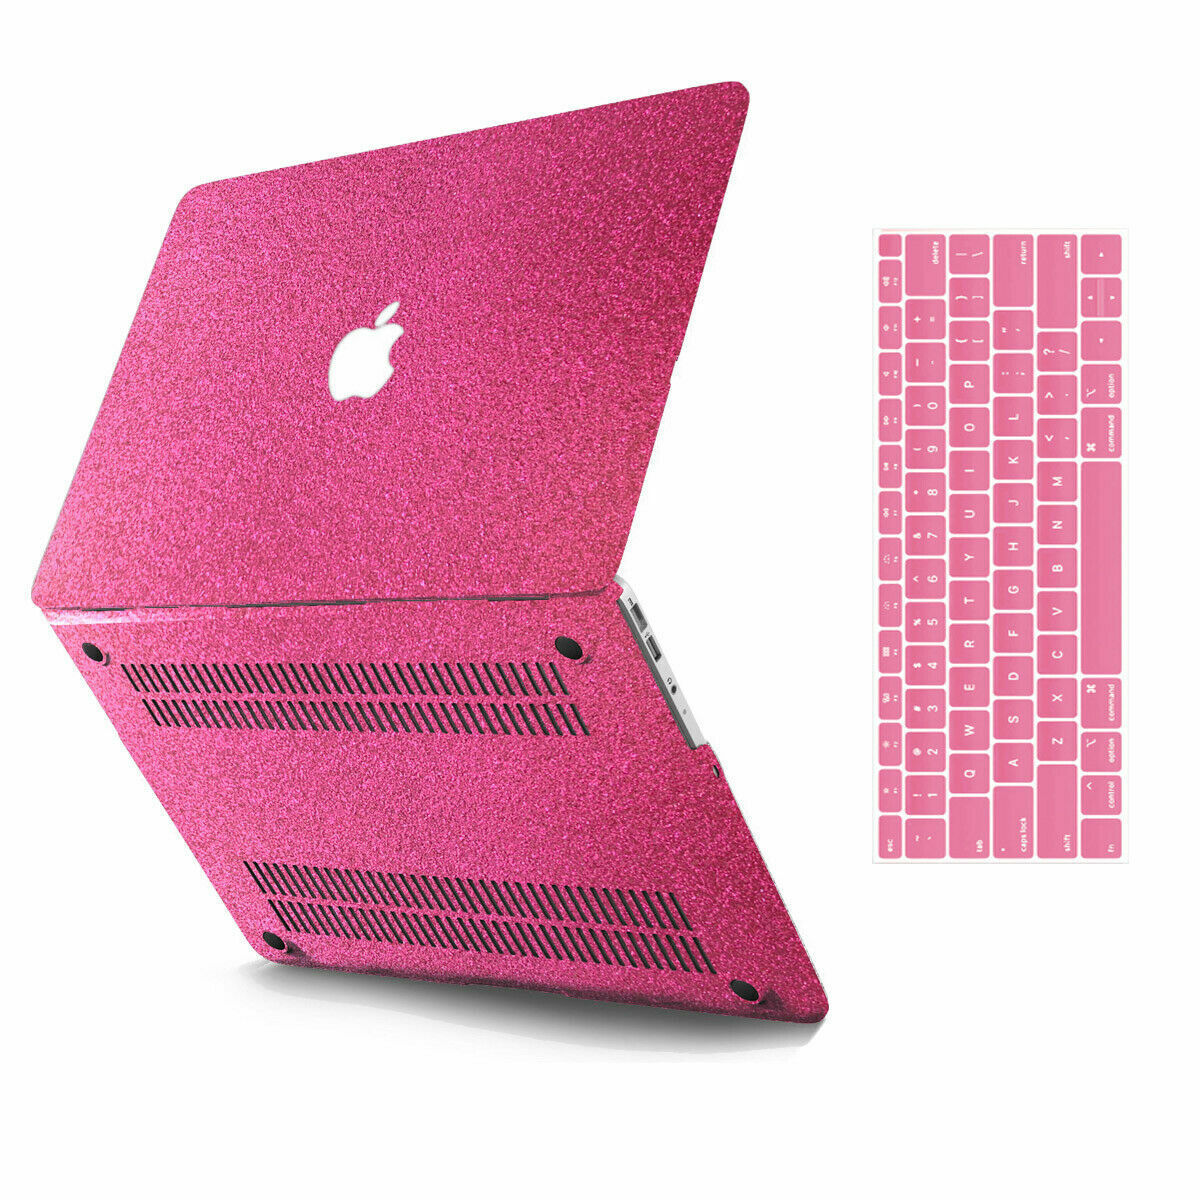 Shinny Glitter coated Laptop Shell Hard Case Cover For New Macbook Pro Air M1 M2